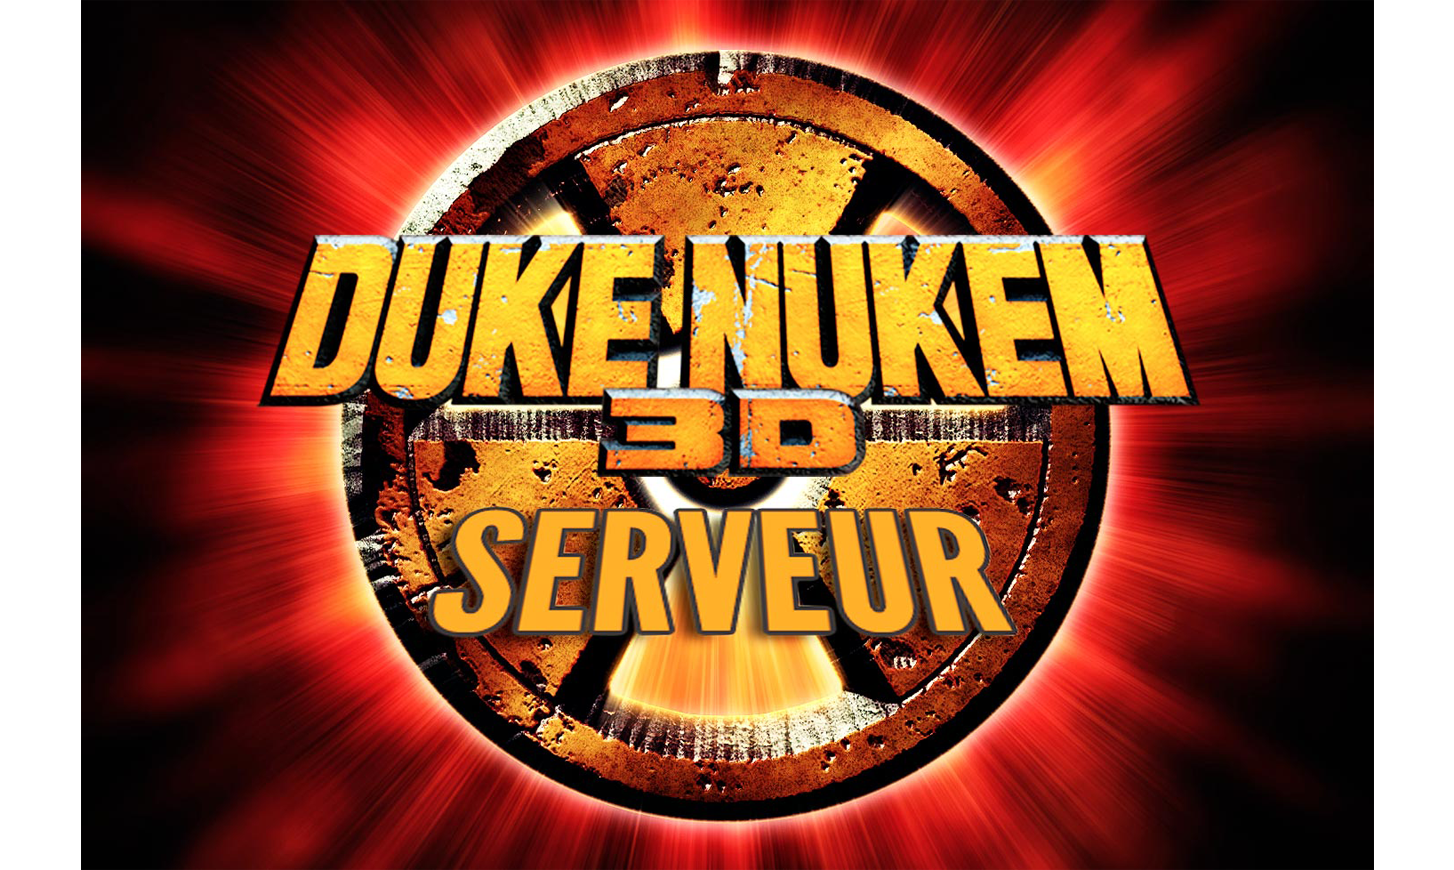 You are currently viewing Serveur Duke Nukem 3D